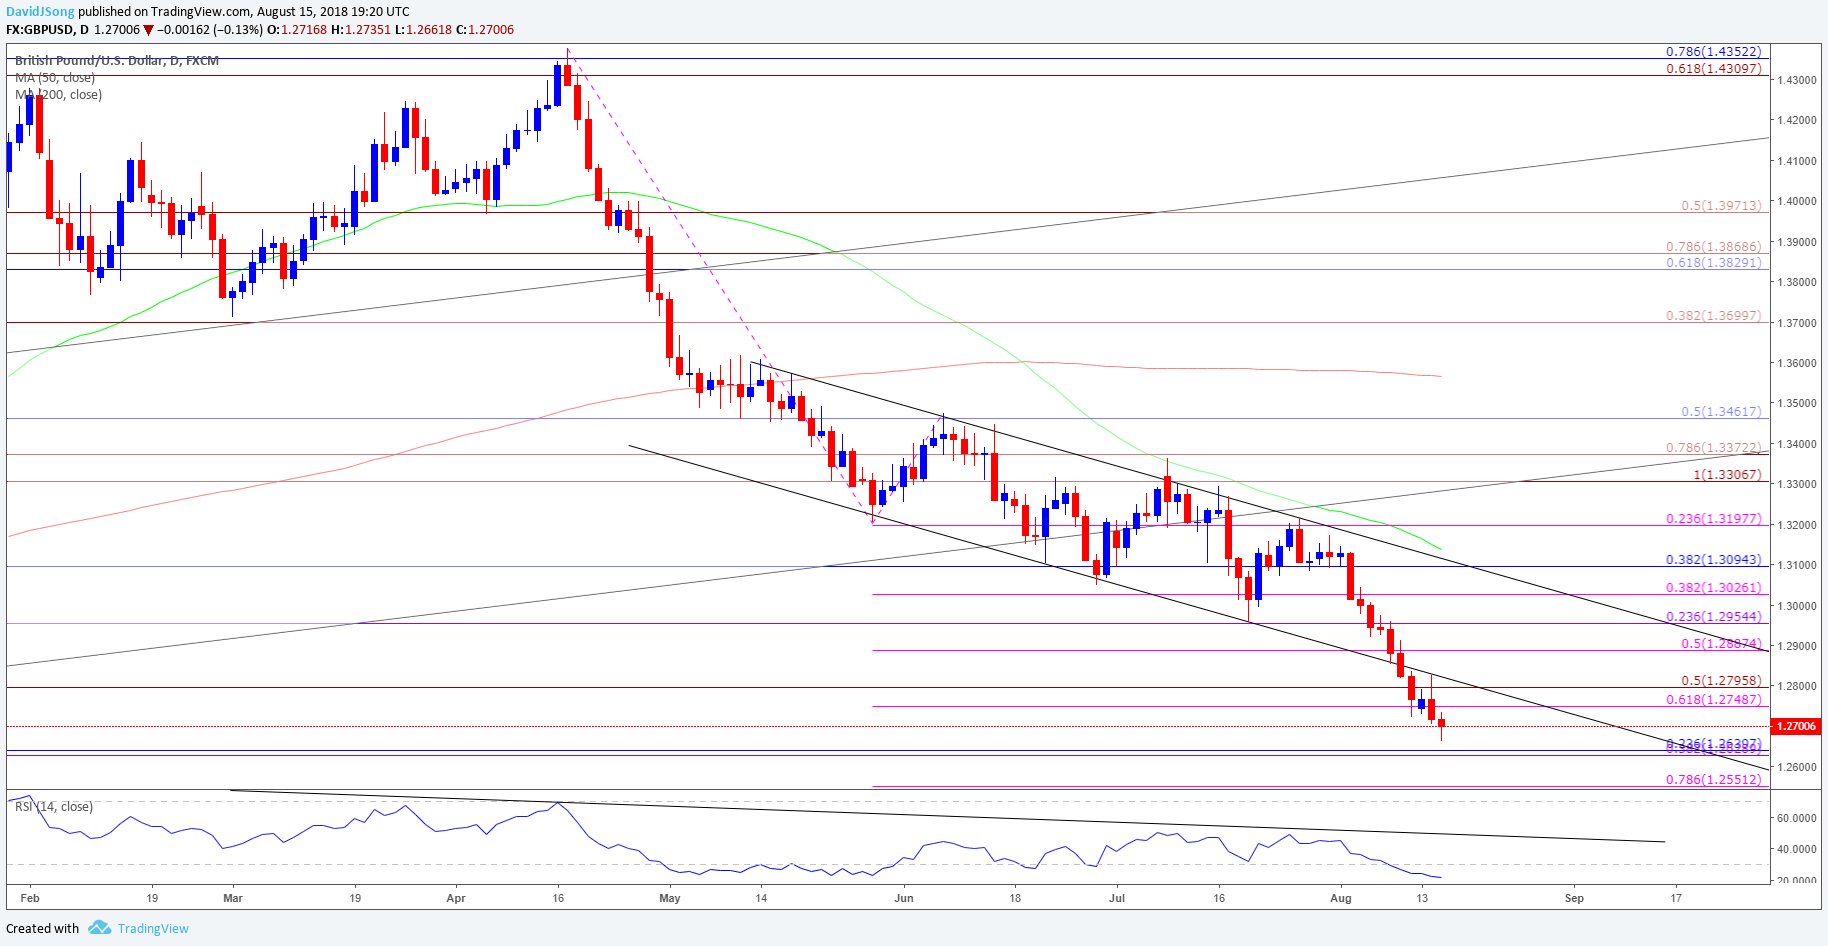 Image of gbpusd daily chart